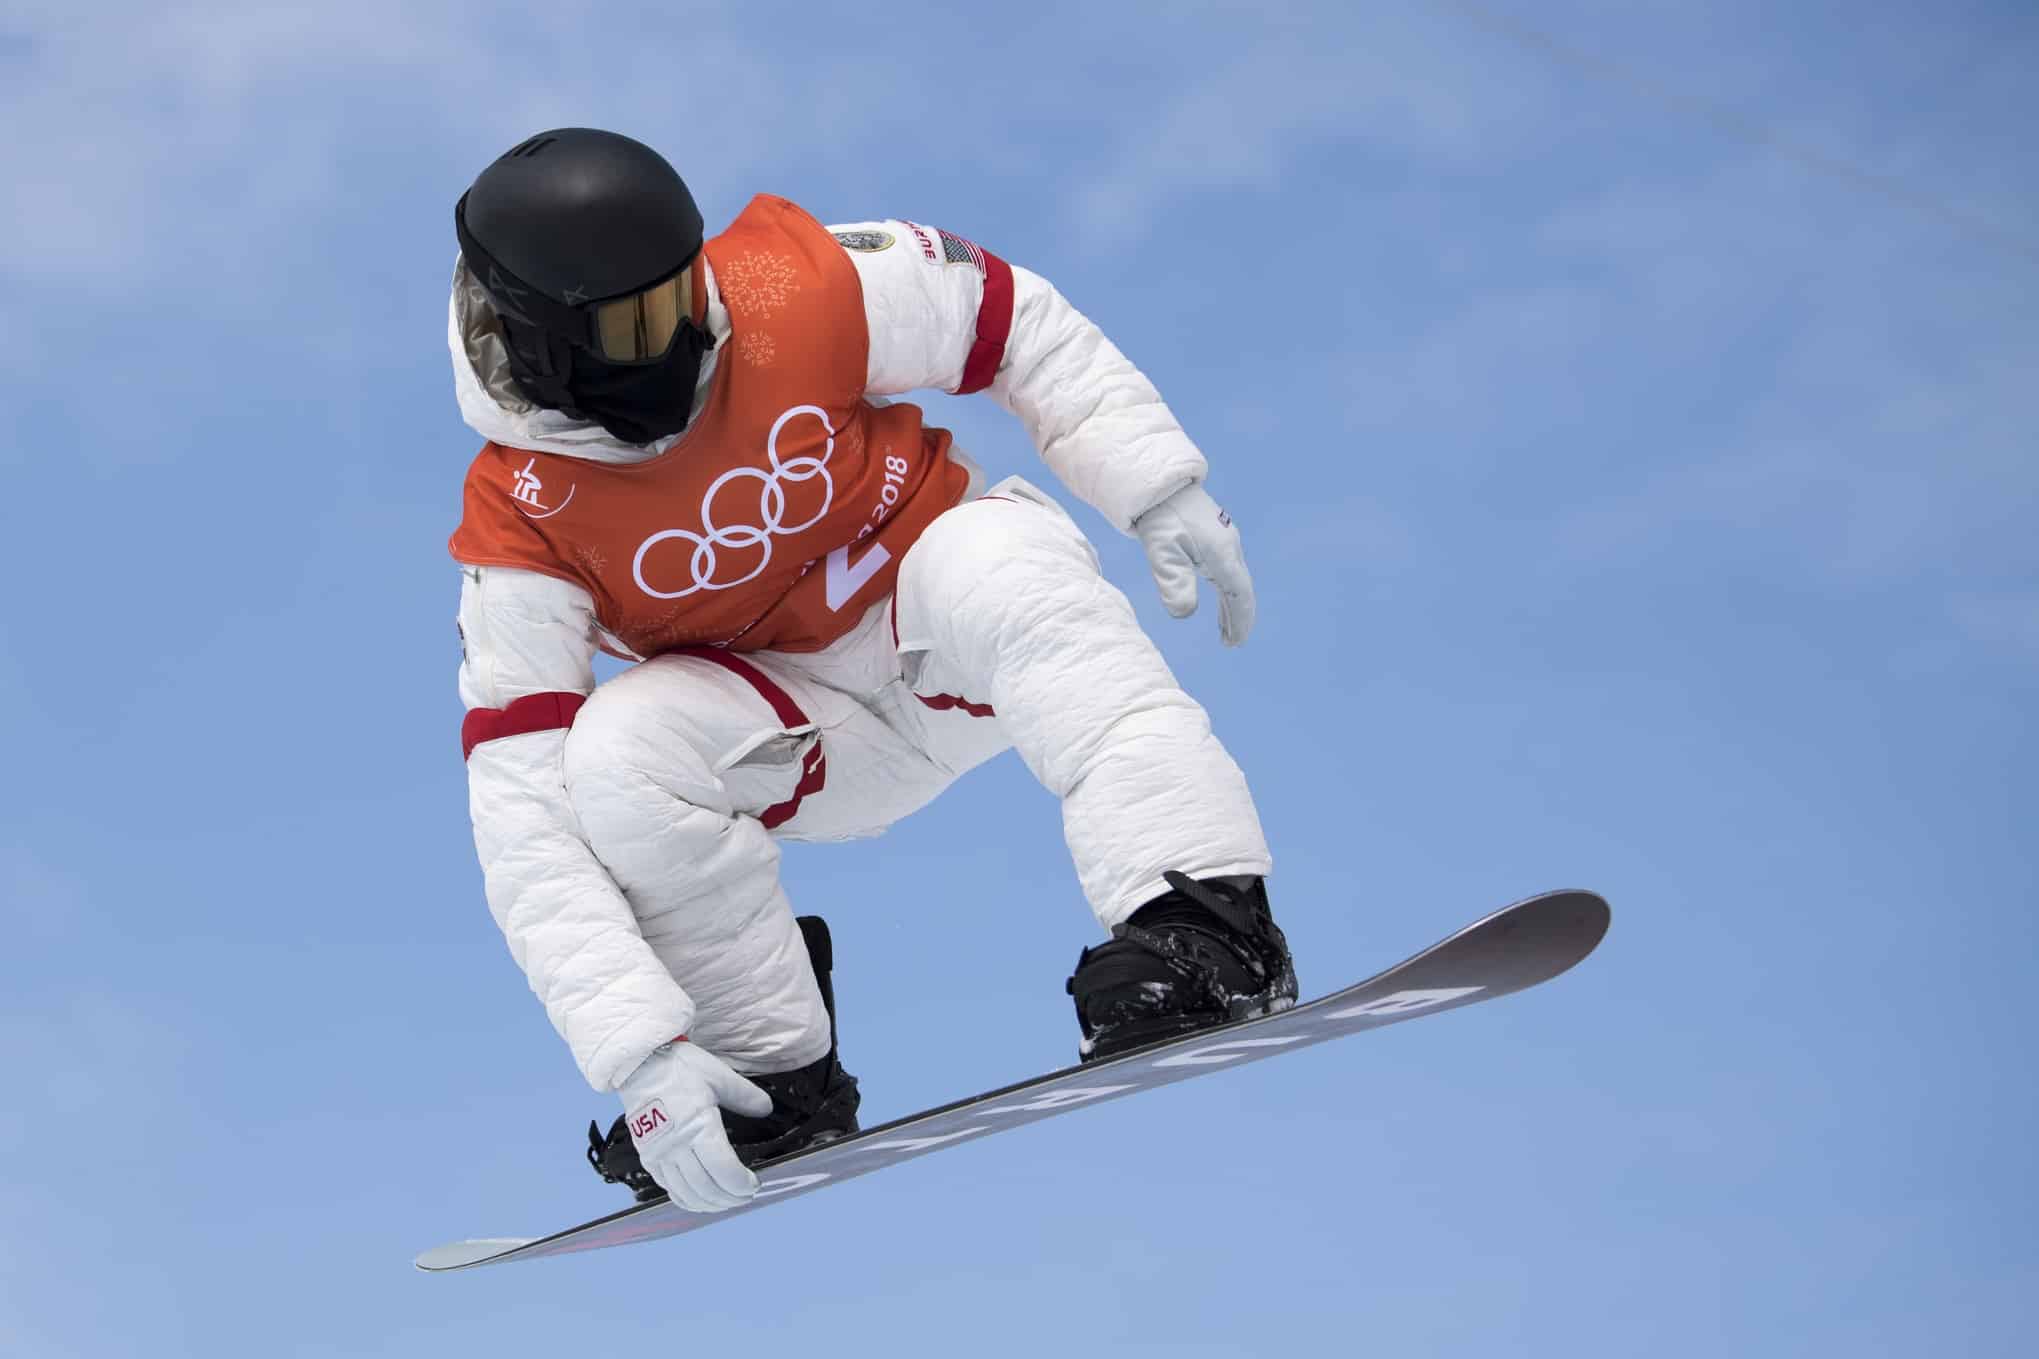 After win, Shaun White has sights set on Olympics